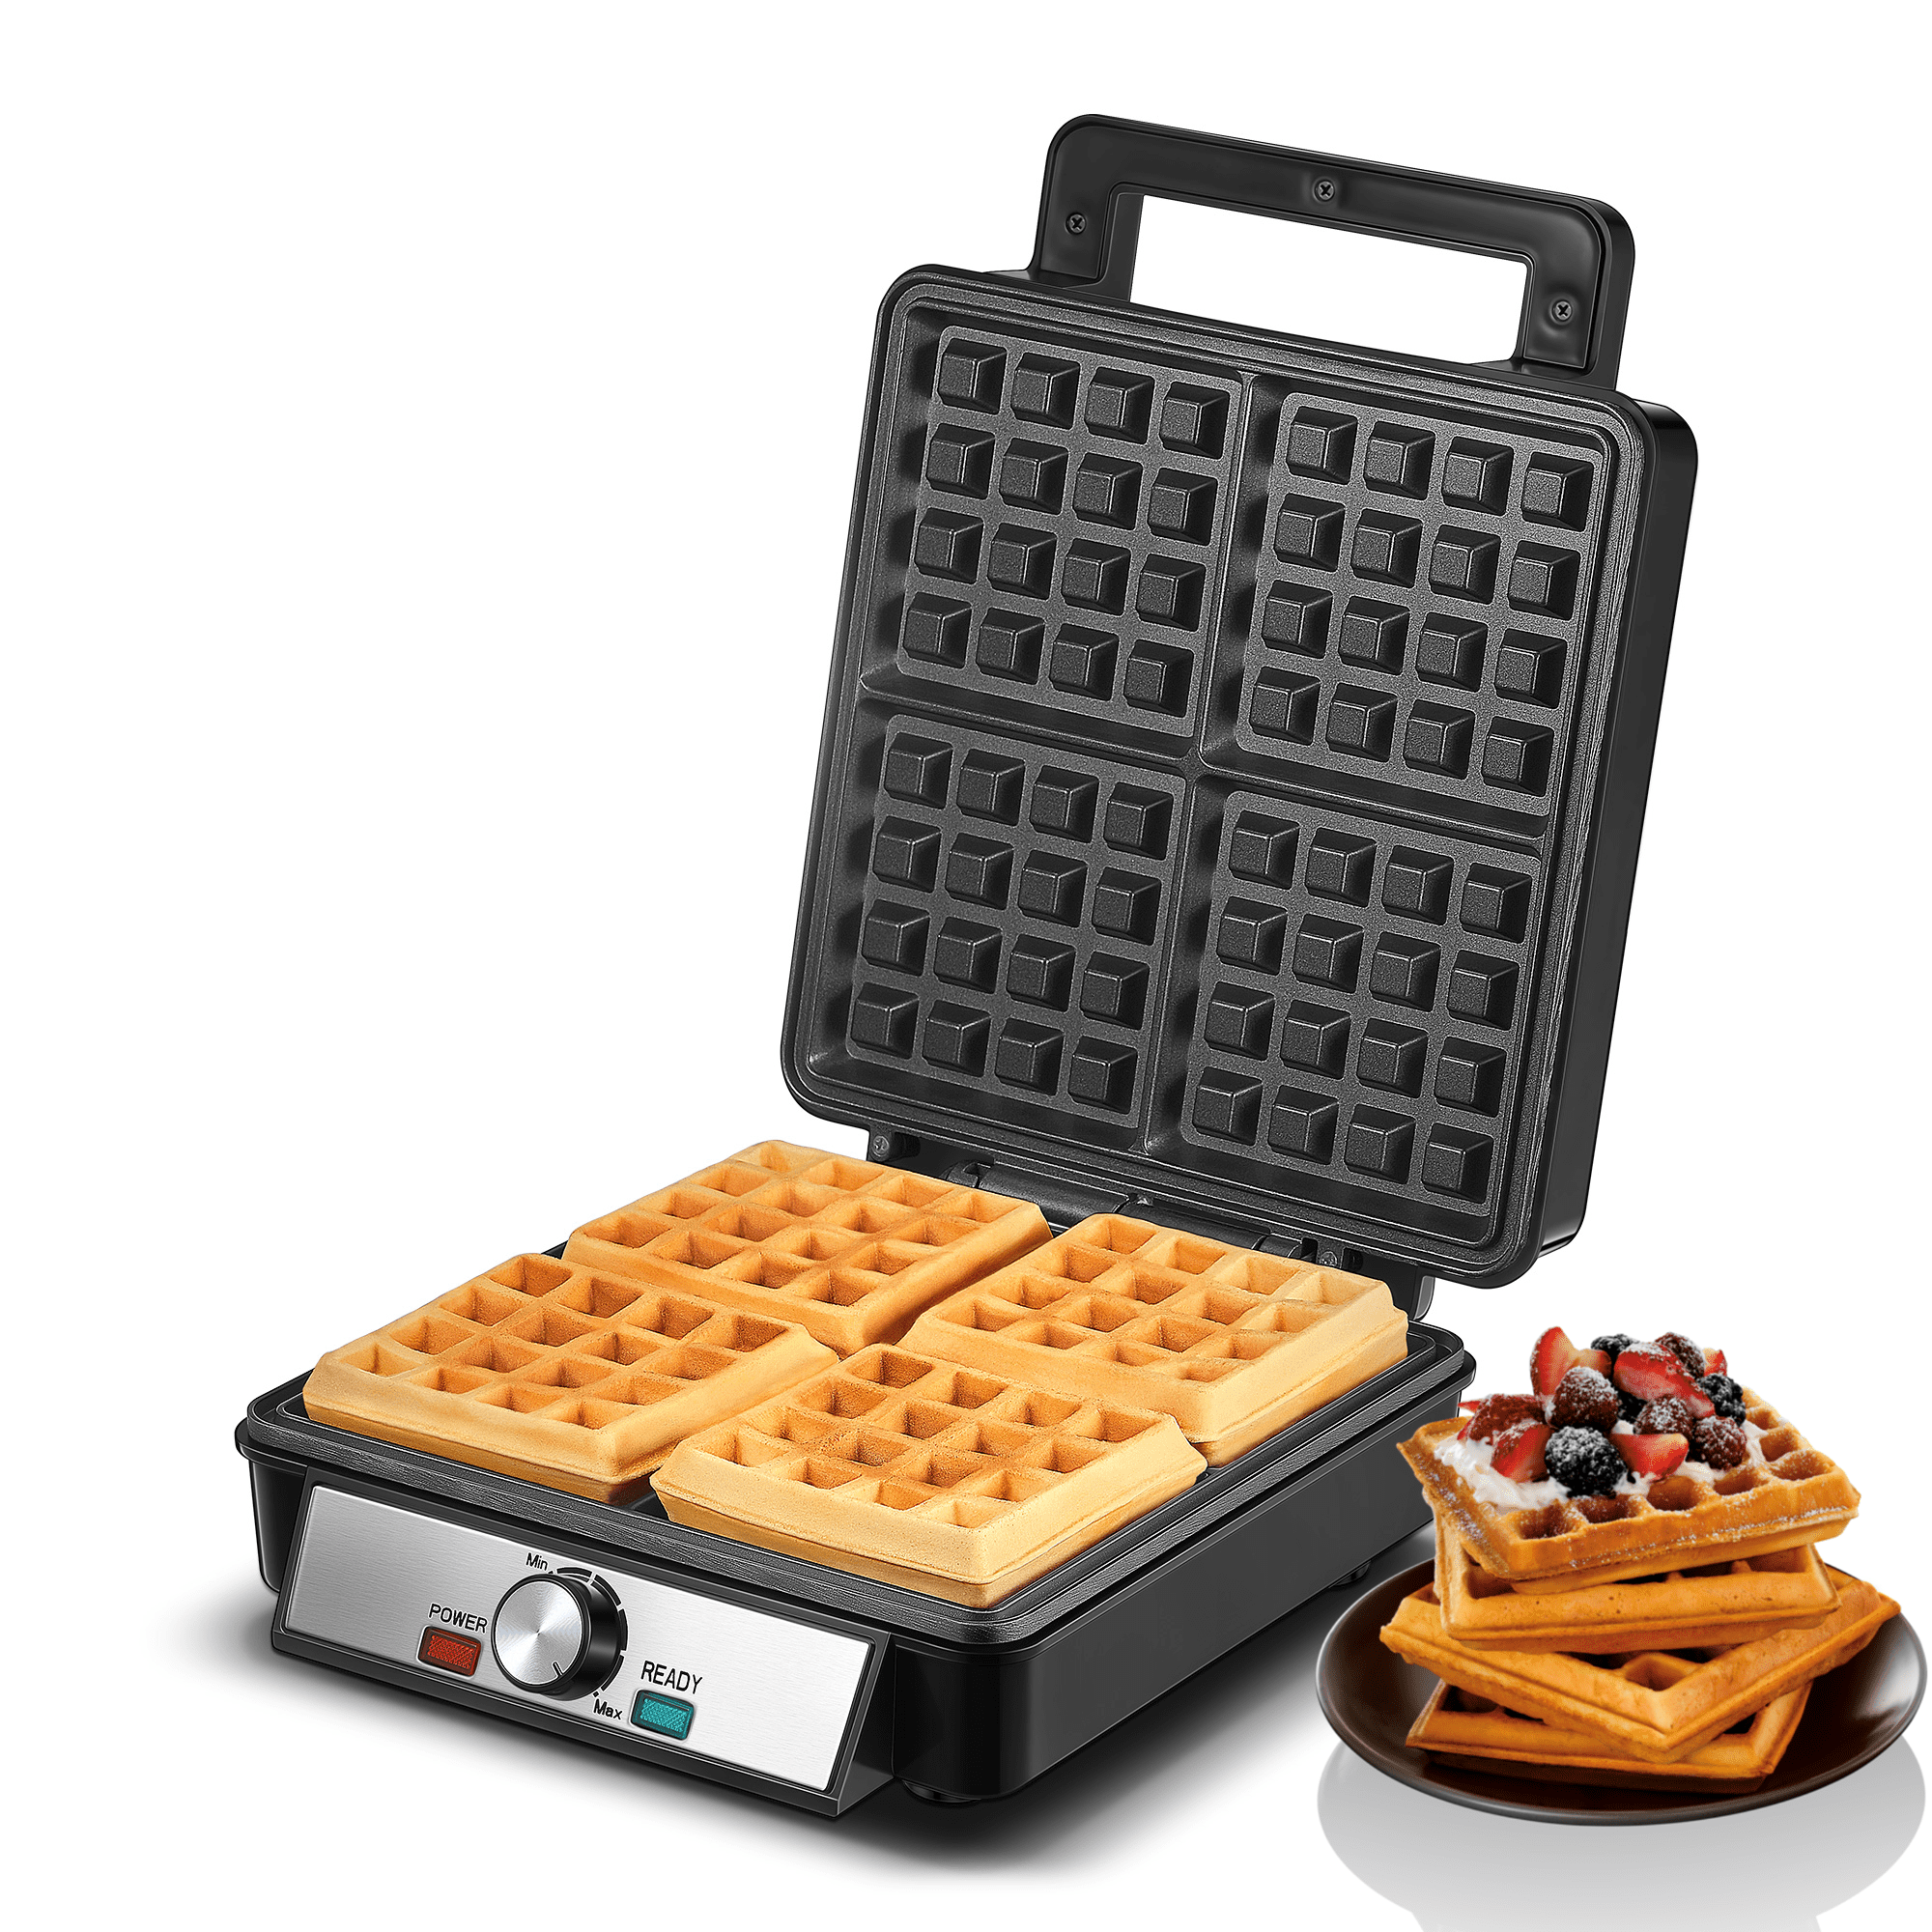 BELLA Classic Waffle Iron, 4 Square Belgian Waffle Maker, Non-stick Extra  Large Plates for Easy Cleanup, Cool Touch Handles, Stainless Steel, Black